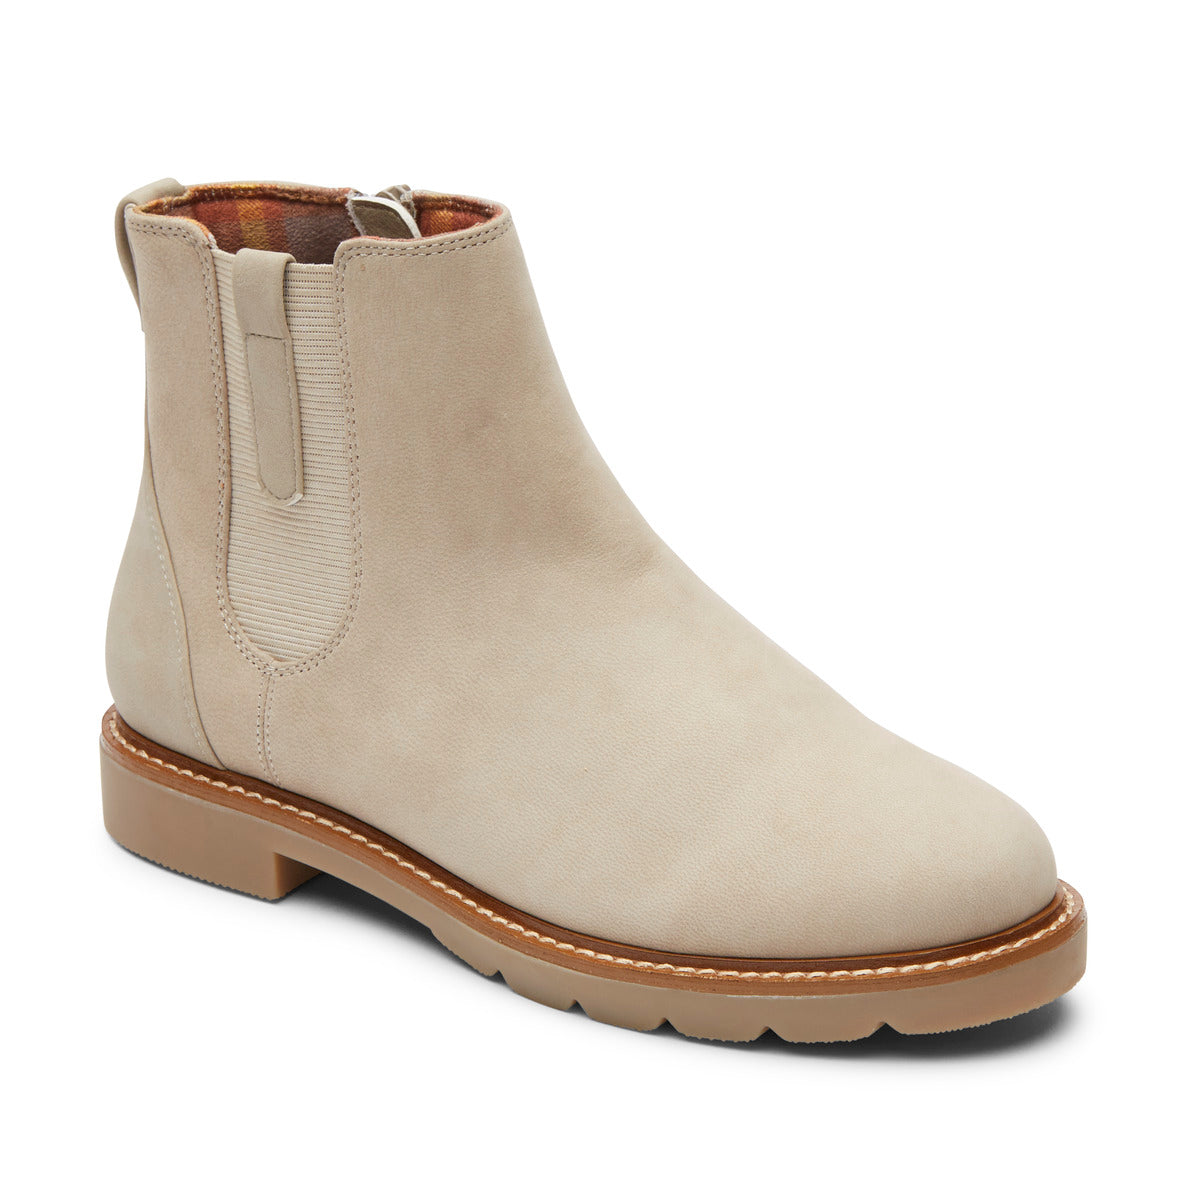 Rockport Womens Kacey Bootie